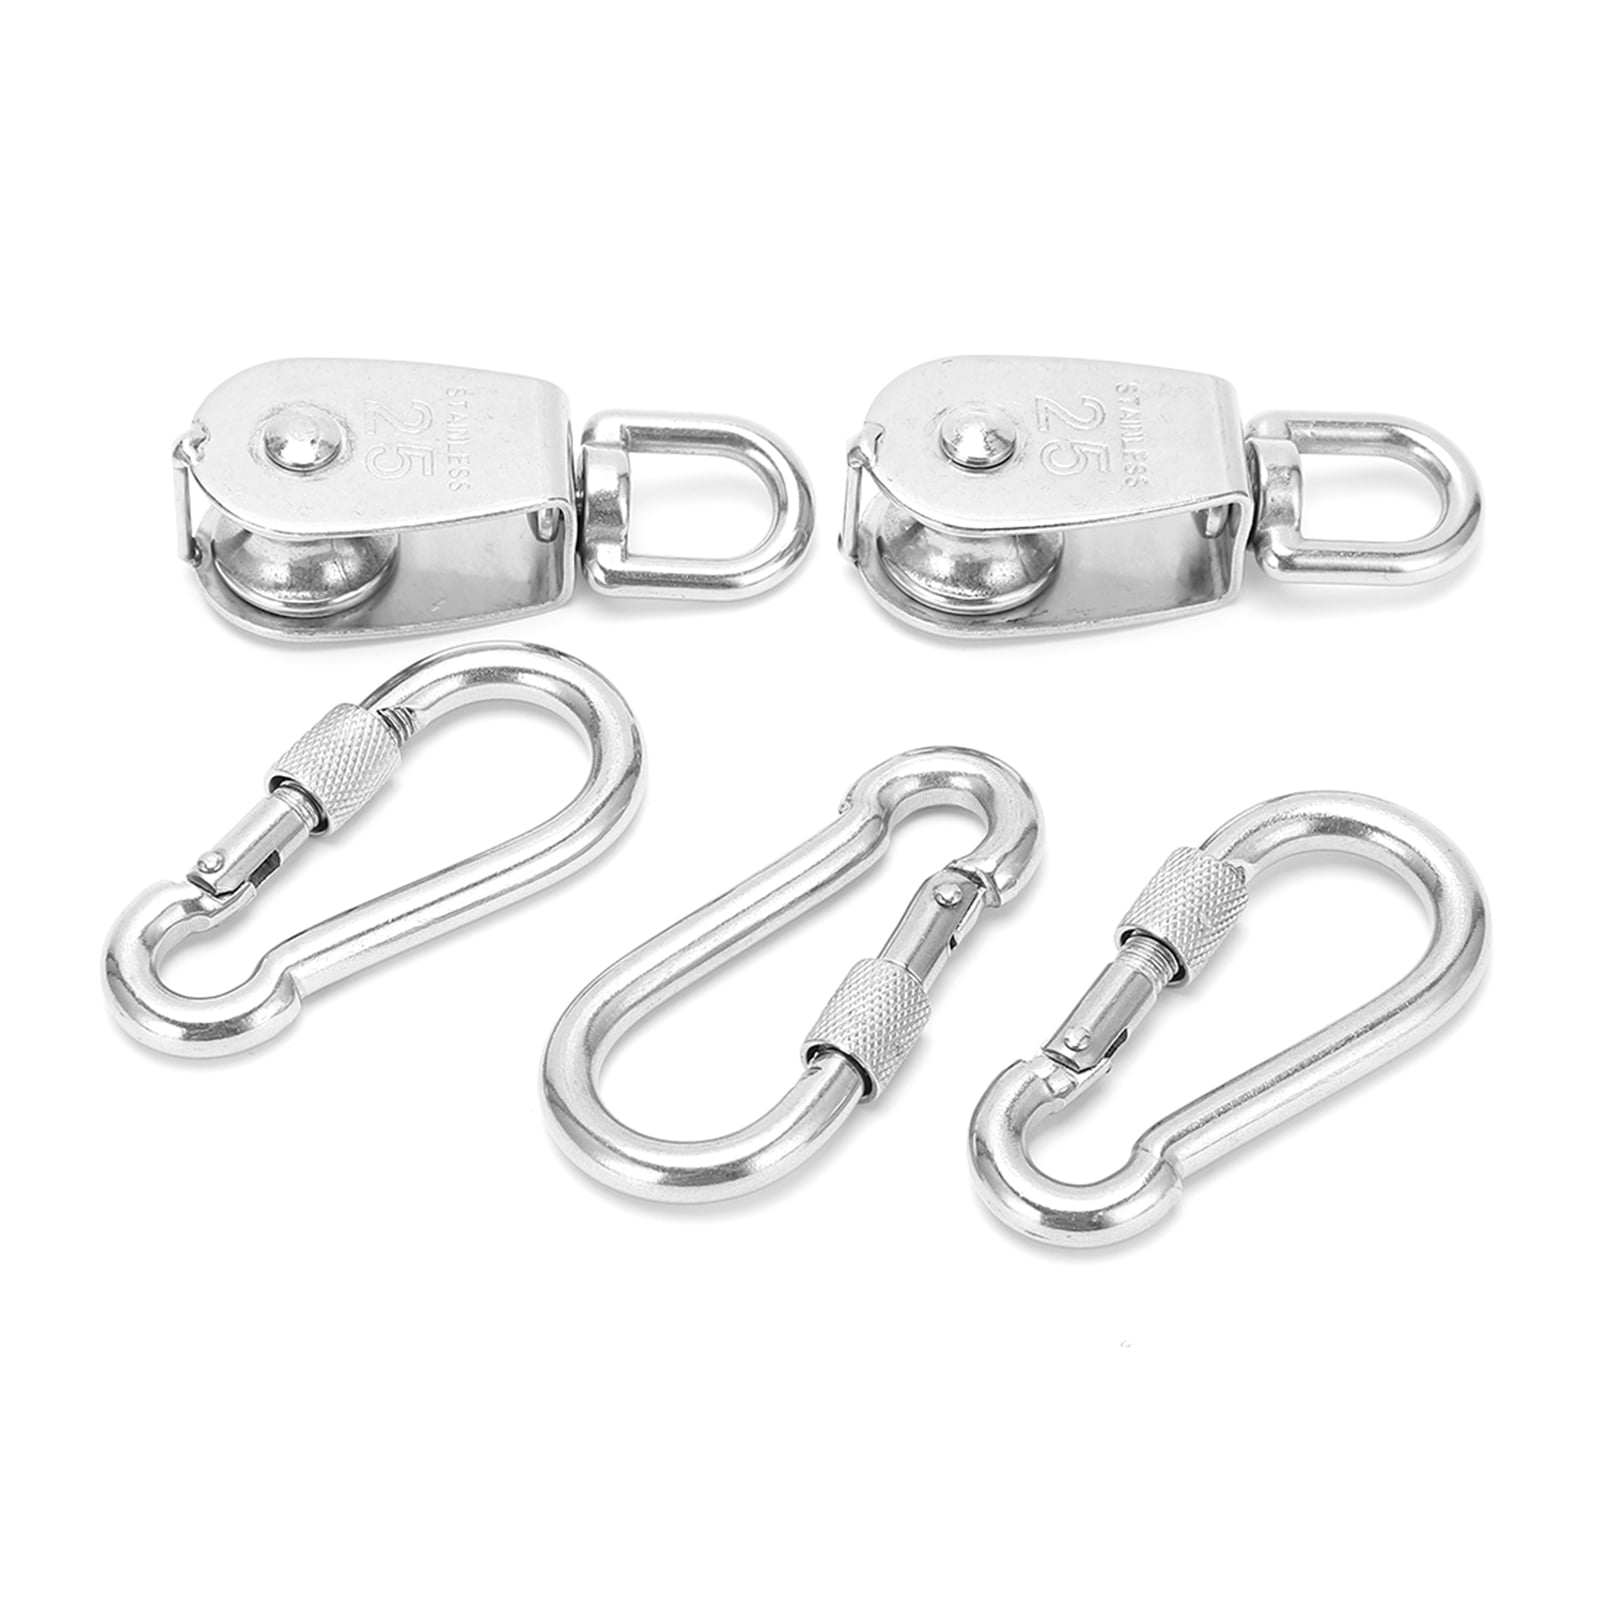 LeonBach Carabiner and Single Pulley Set 2 Pcs M25 Stainless Steel Single Pulley 4 Pcs 3.15 Heavy Duty Carabiner with Spring Snap Hook 